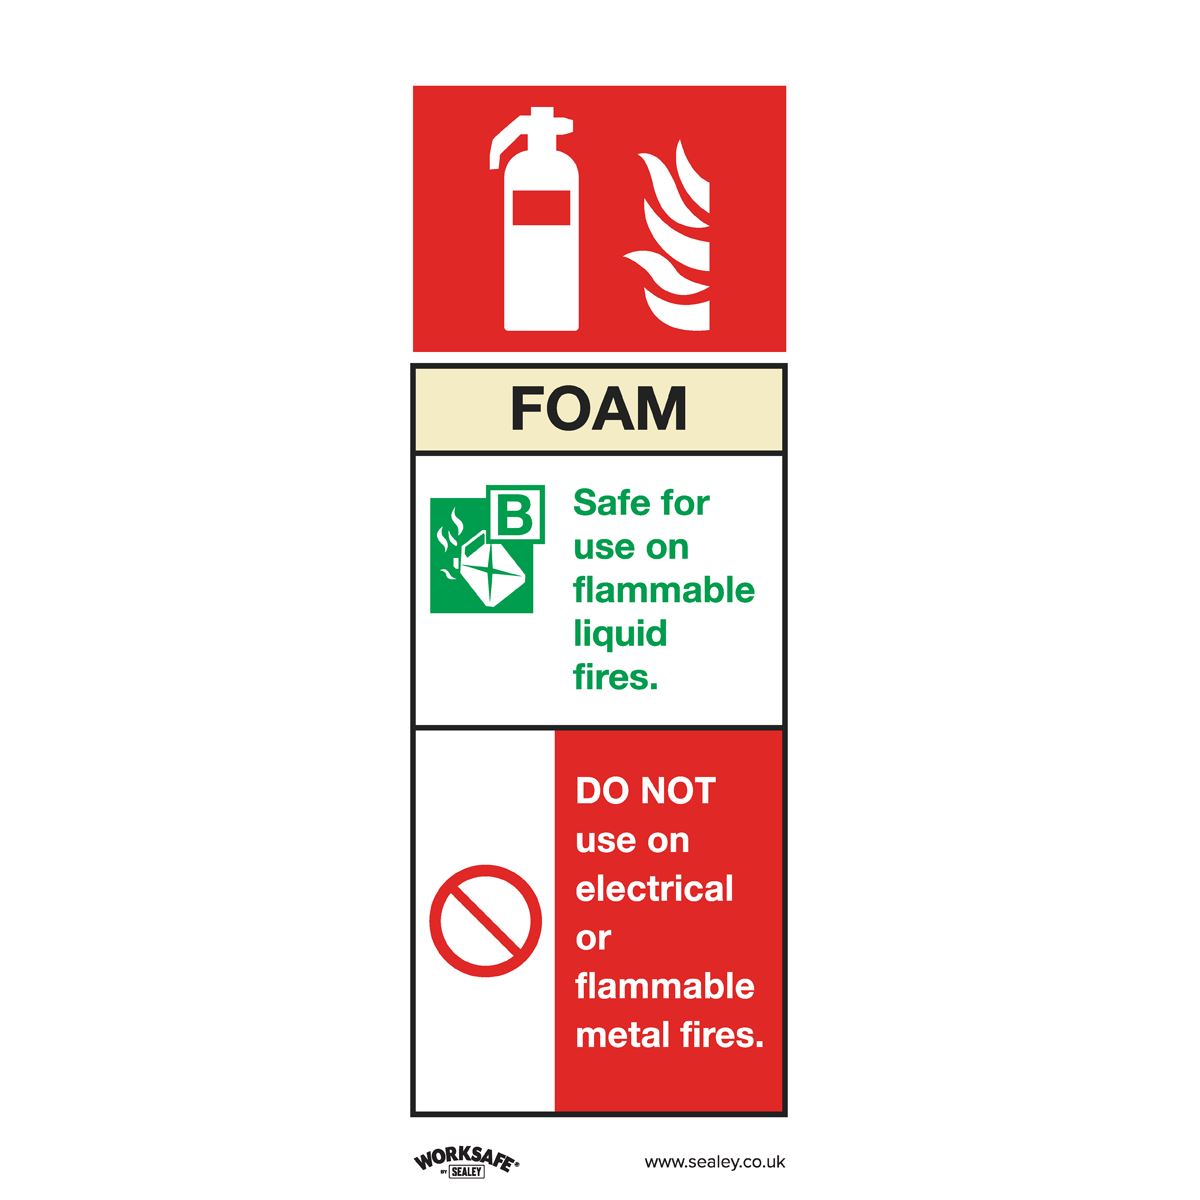 Worksafe by Sealey Safe Conditions Safety Sign - Foam Fire Extinguisher - Rigid Plastic - Pack of 10